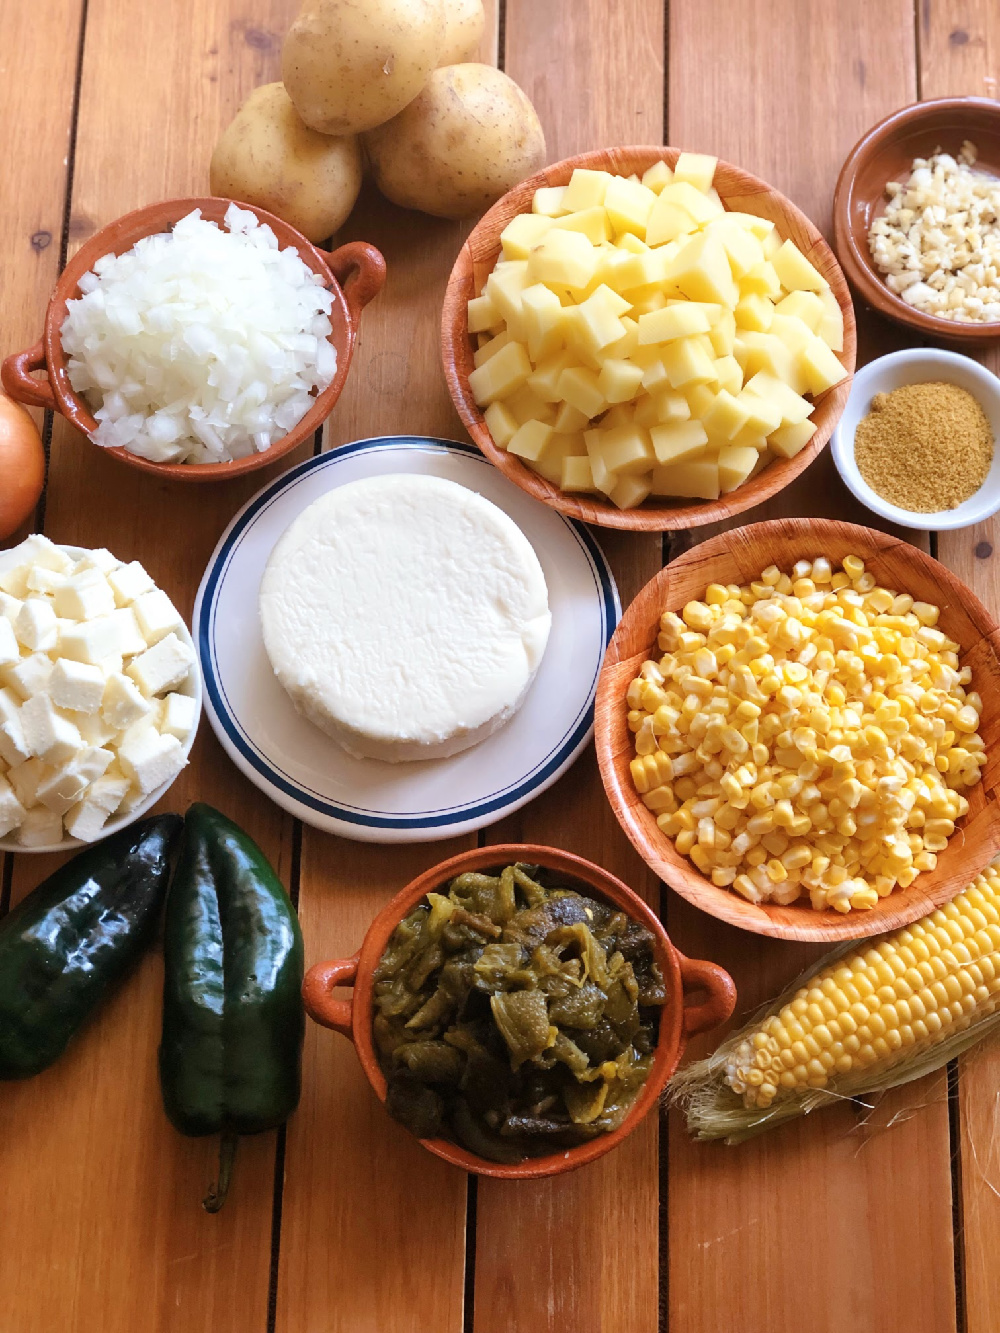 The ingredients for the soup include potatoes, corn, onion, garlic, queso fresco, roasted poblanos, milk, and seasonings